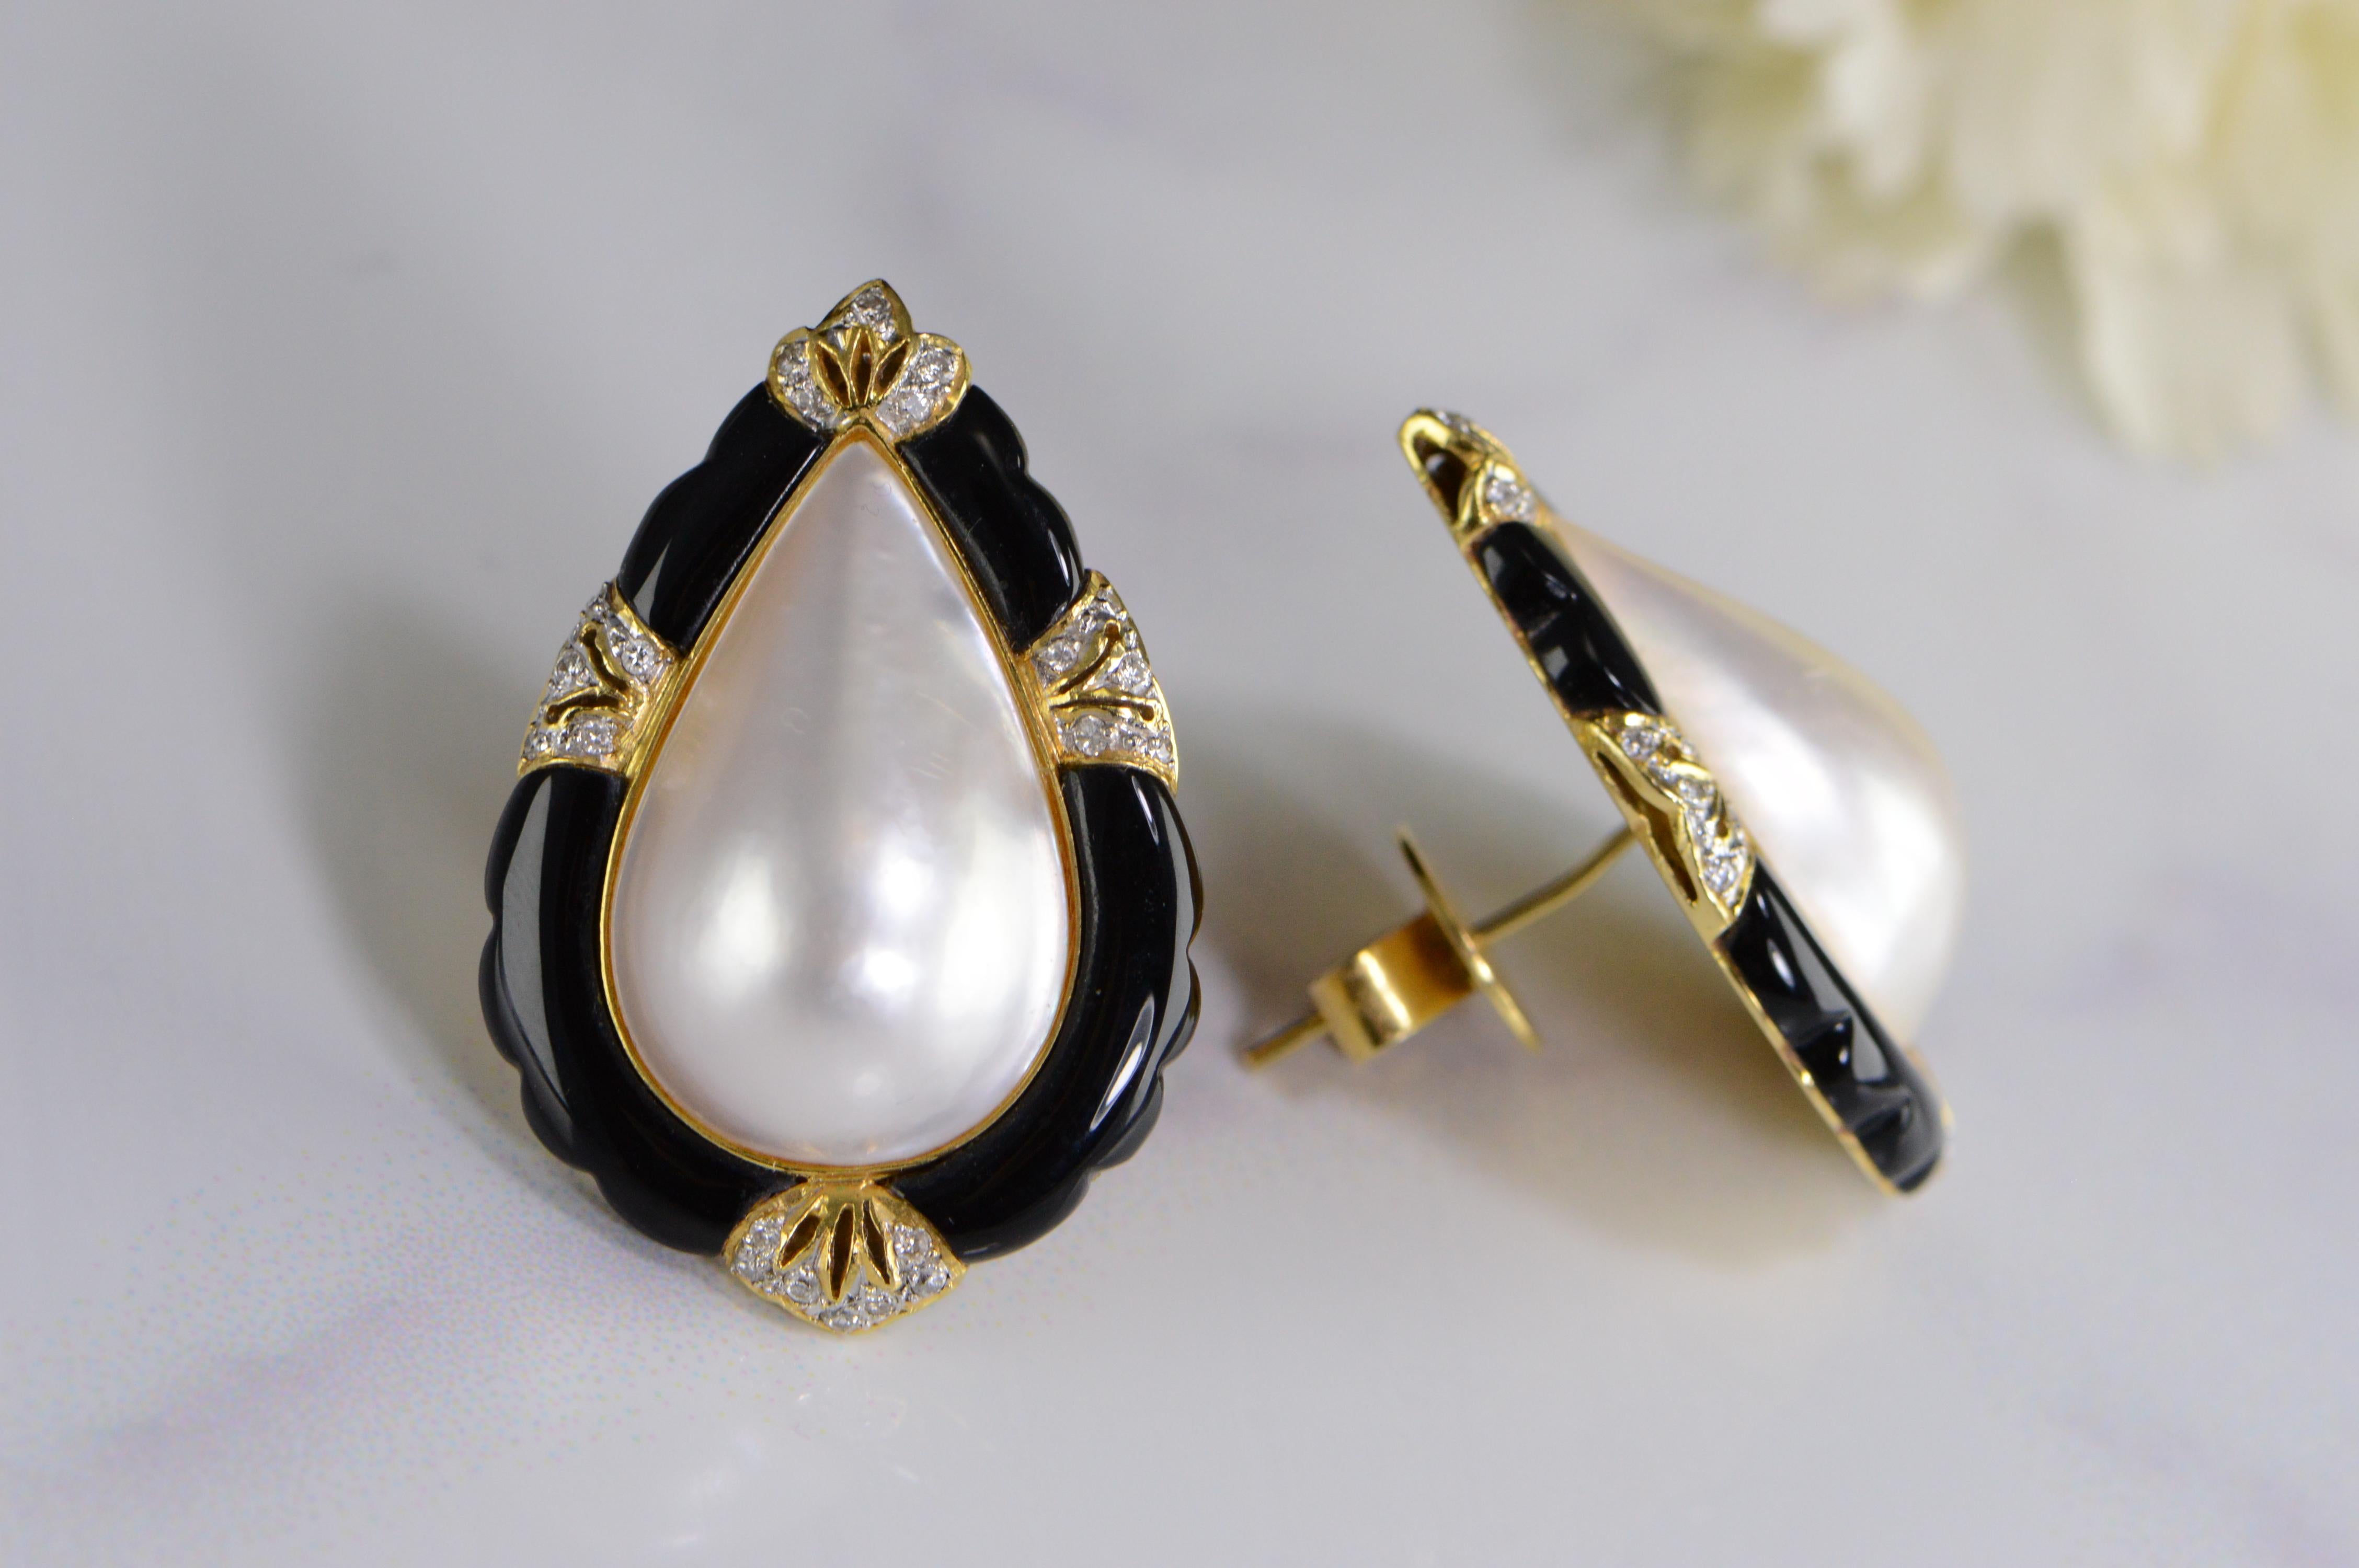 Pearl Shape Pearl Onyx Diamond Earrings are set in 18K yellow gold. Substantial in size, they weight 19.5 grams. Classic, elegant, timeless. 